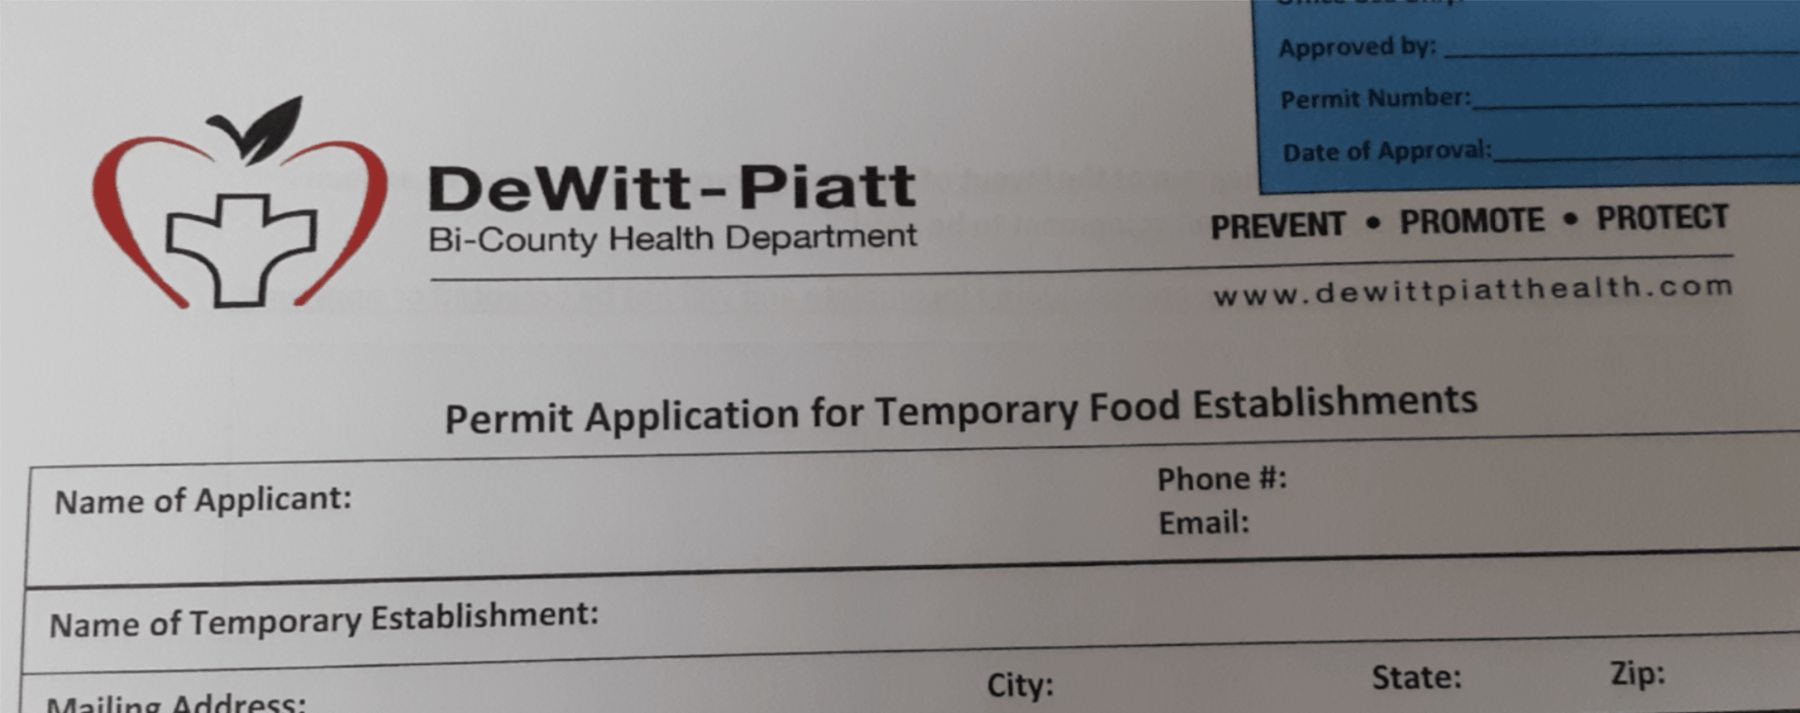 Requirements for Obtaining a Temporary Food Permit